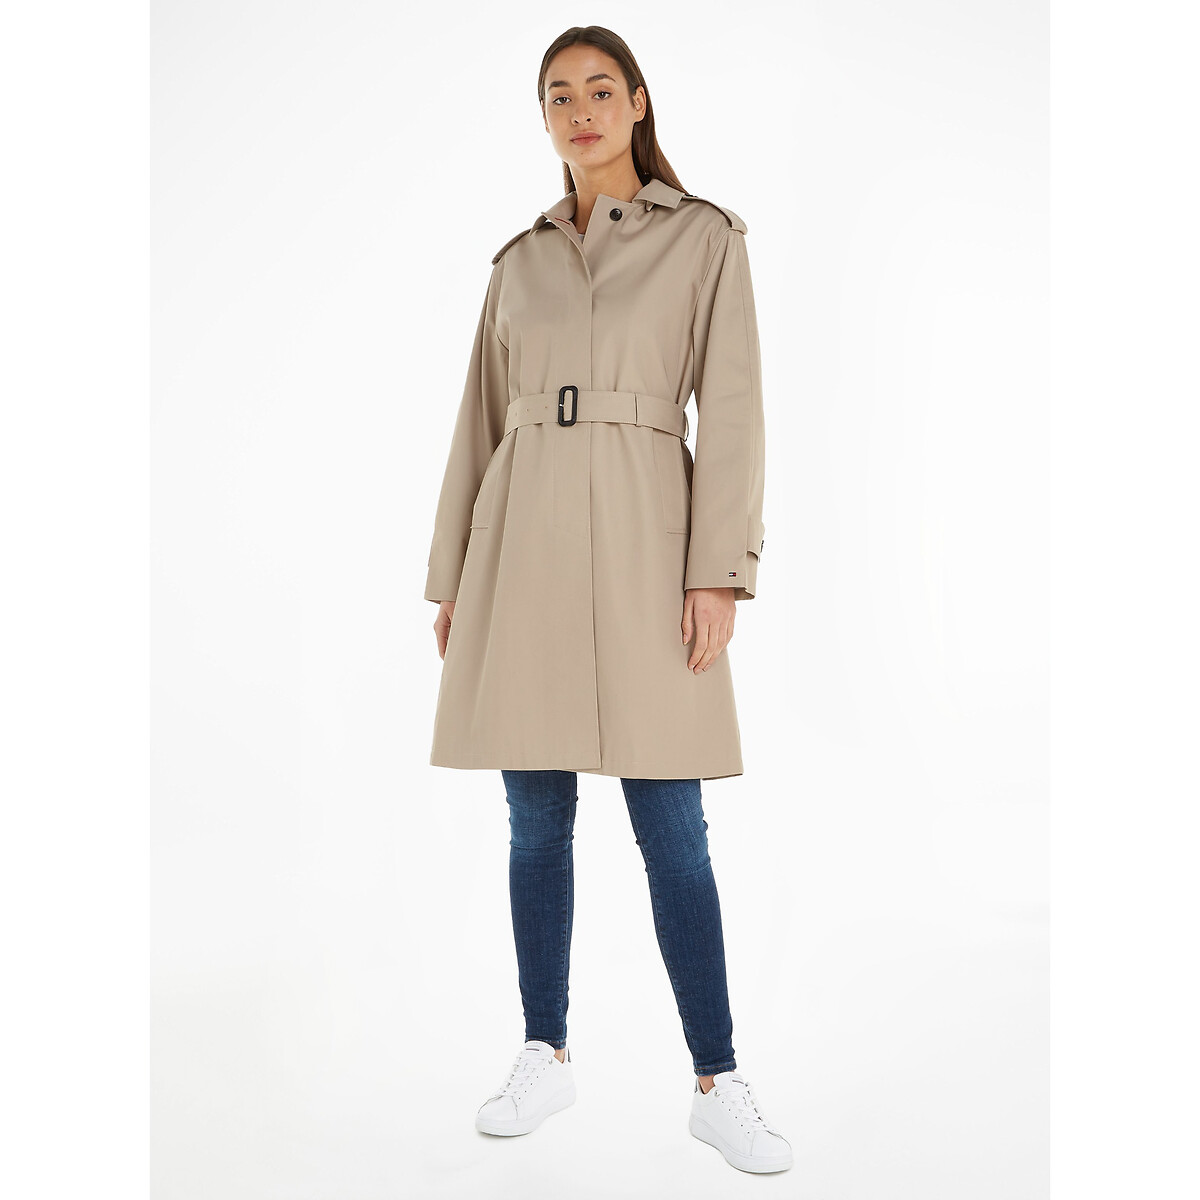 Image of Cotton Hooded Belted Trench Coat, Mid-Length